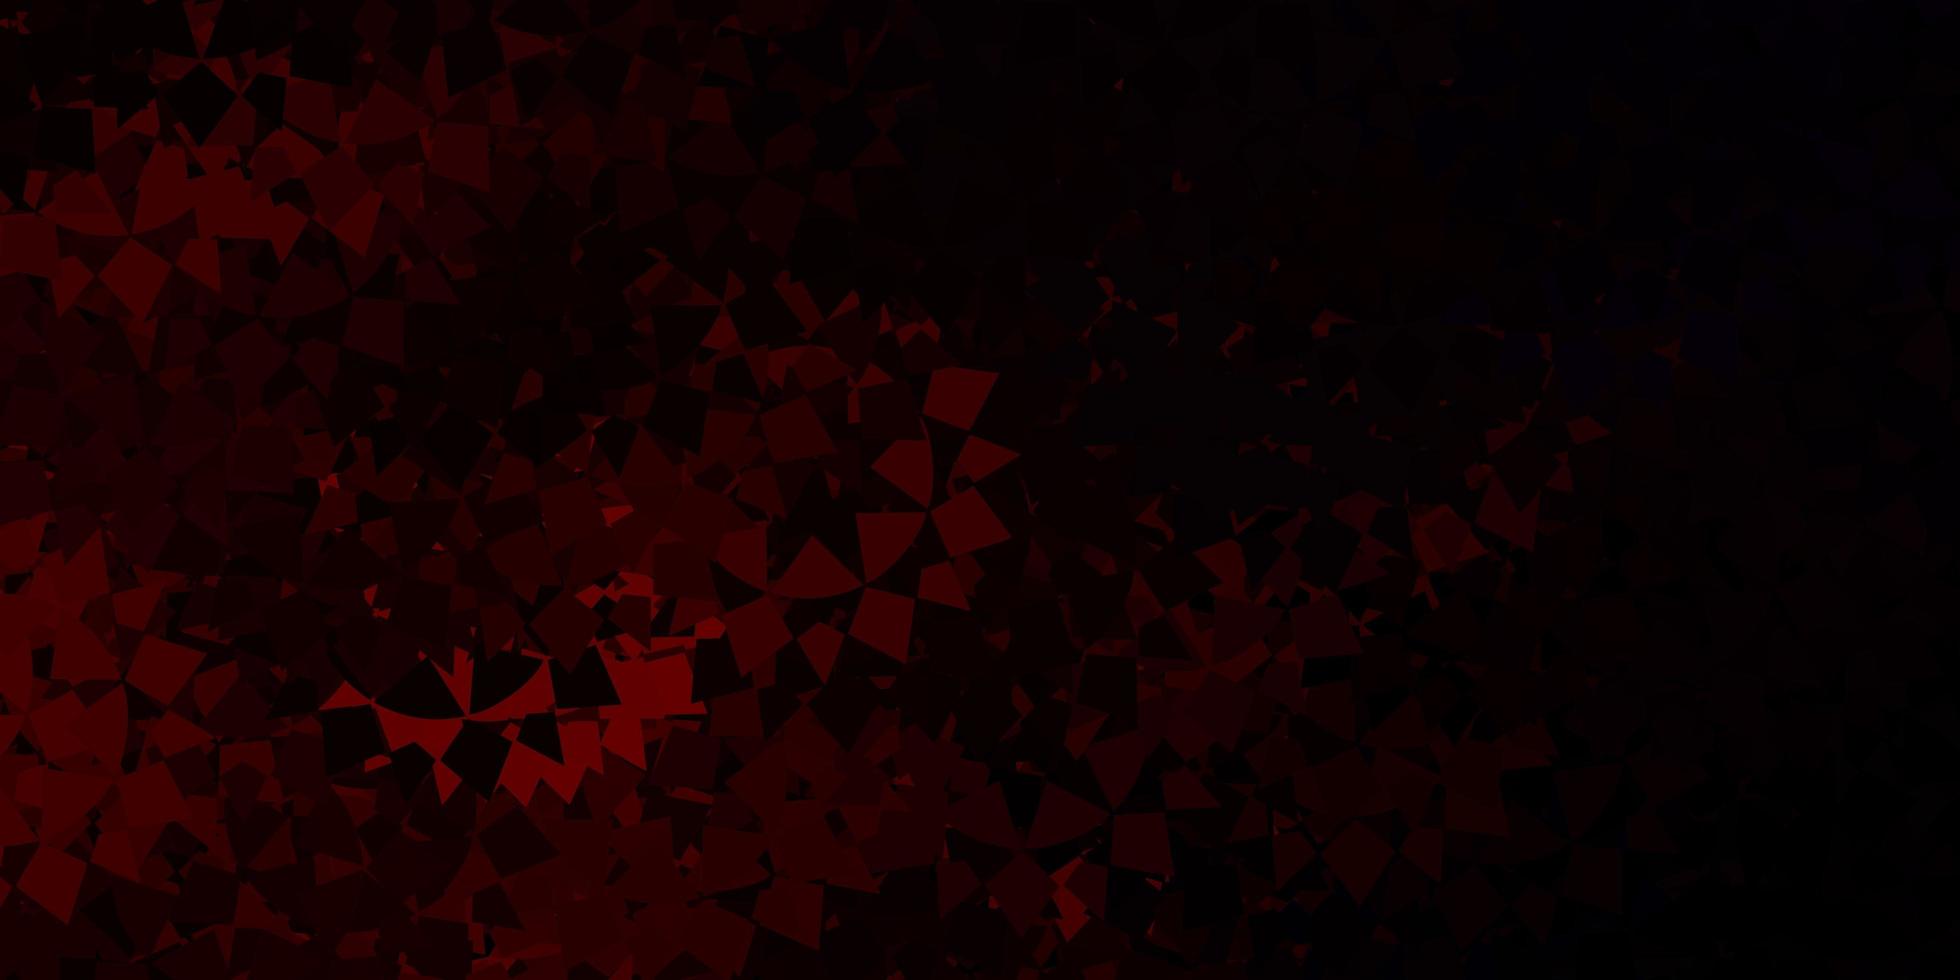 Dark red vector pattern with polygonal shapes.